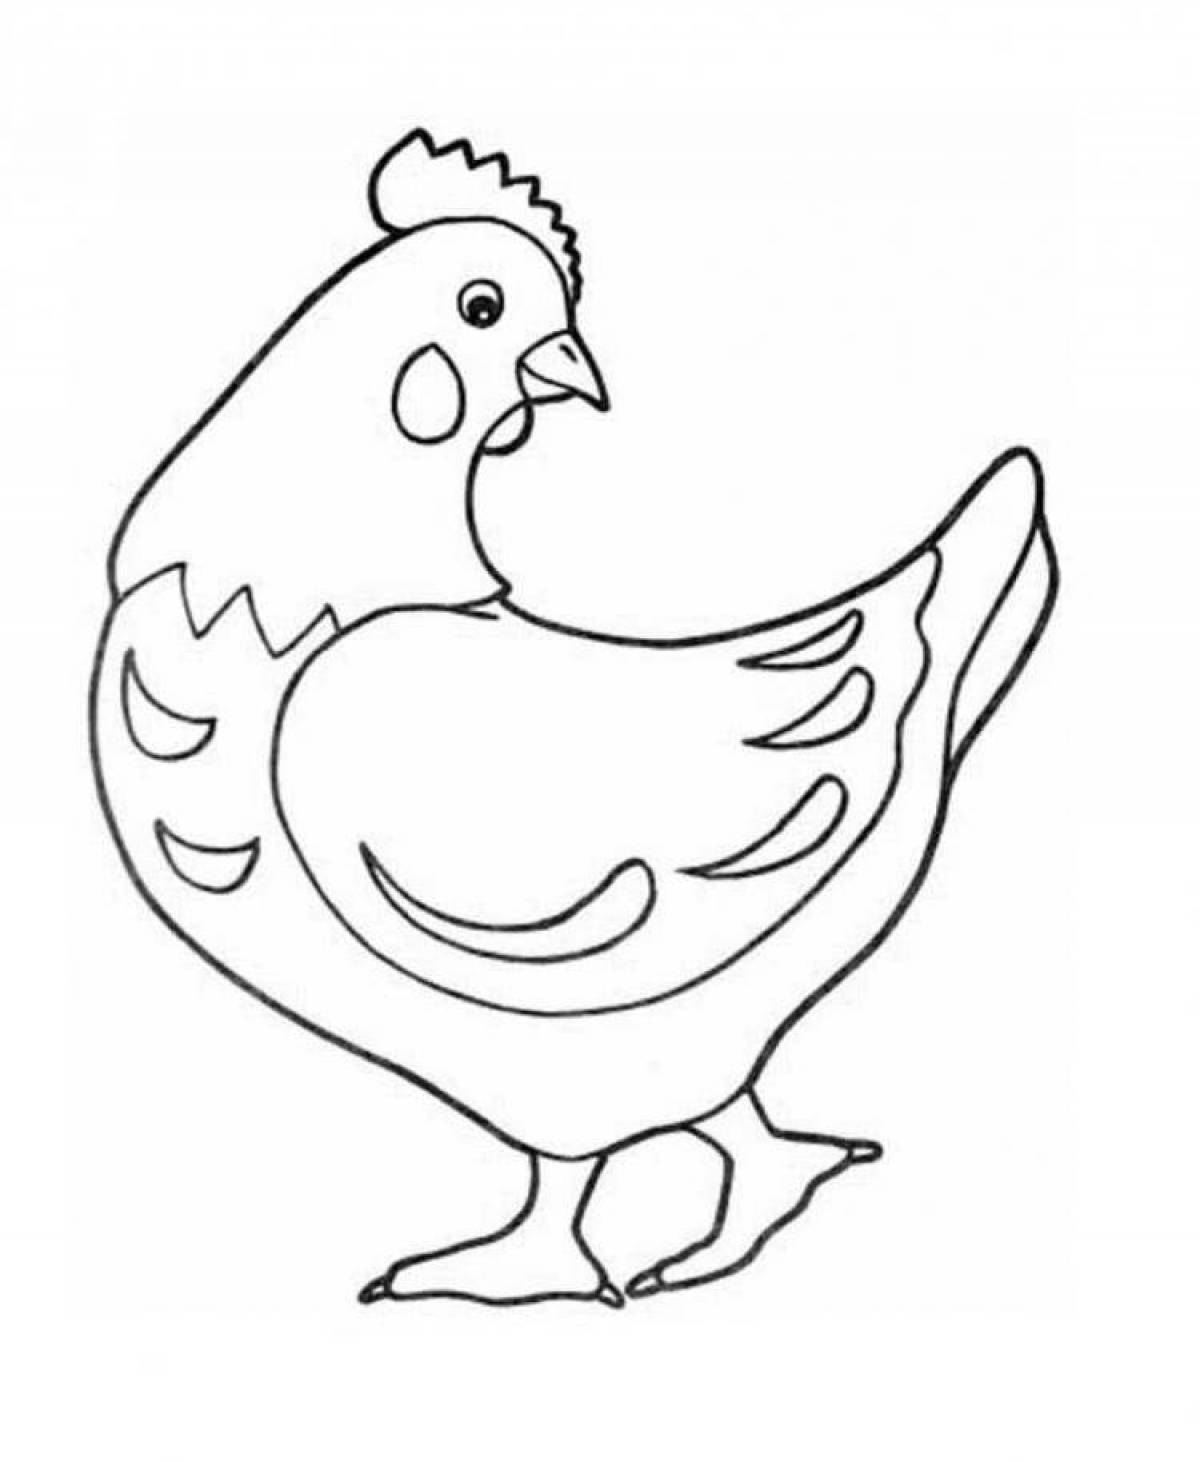 Adorable poultry coloring page for kids